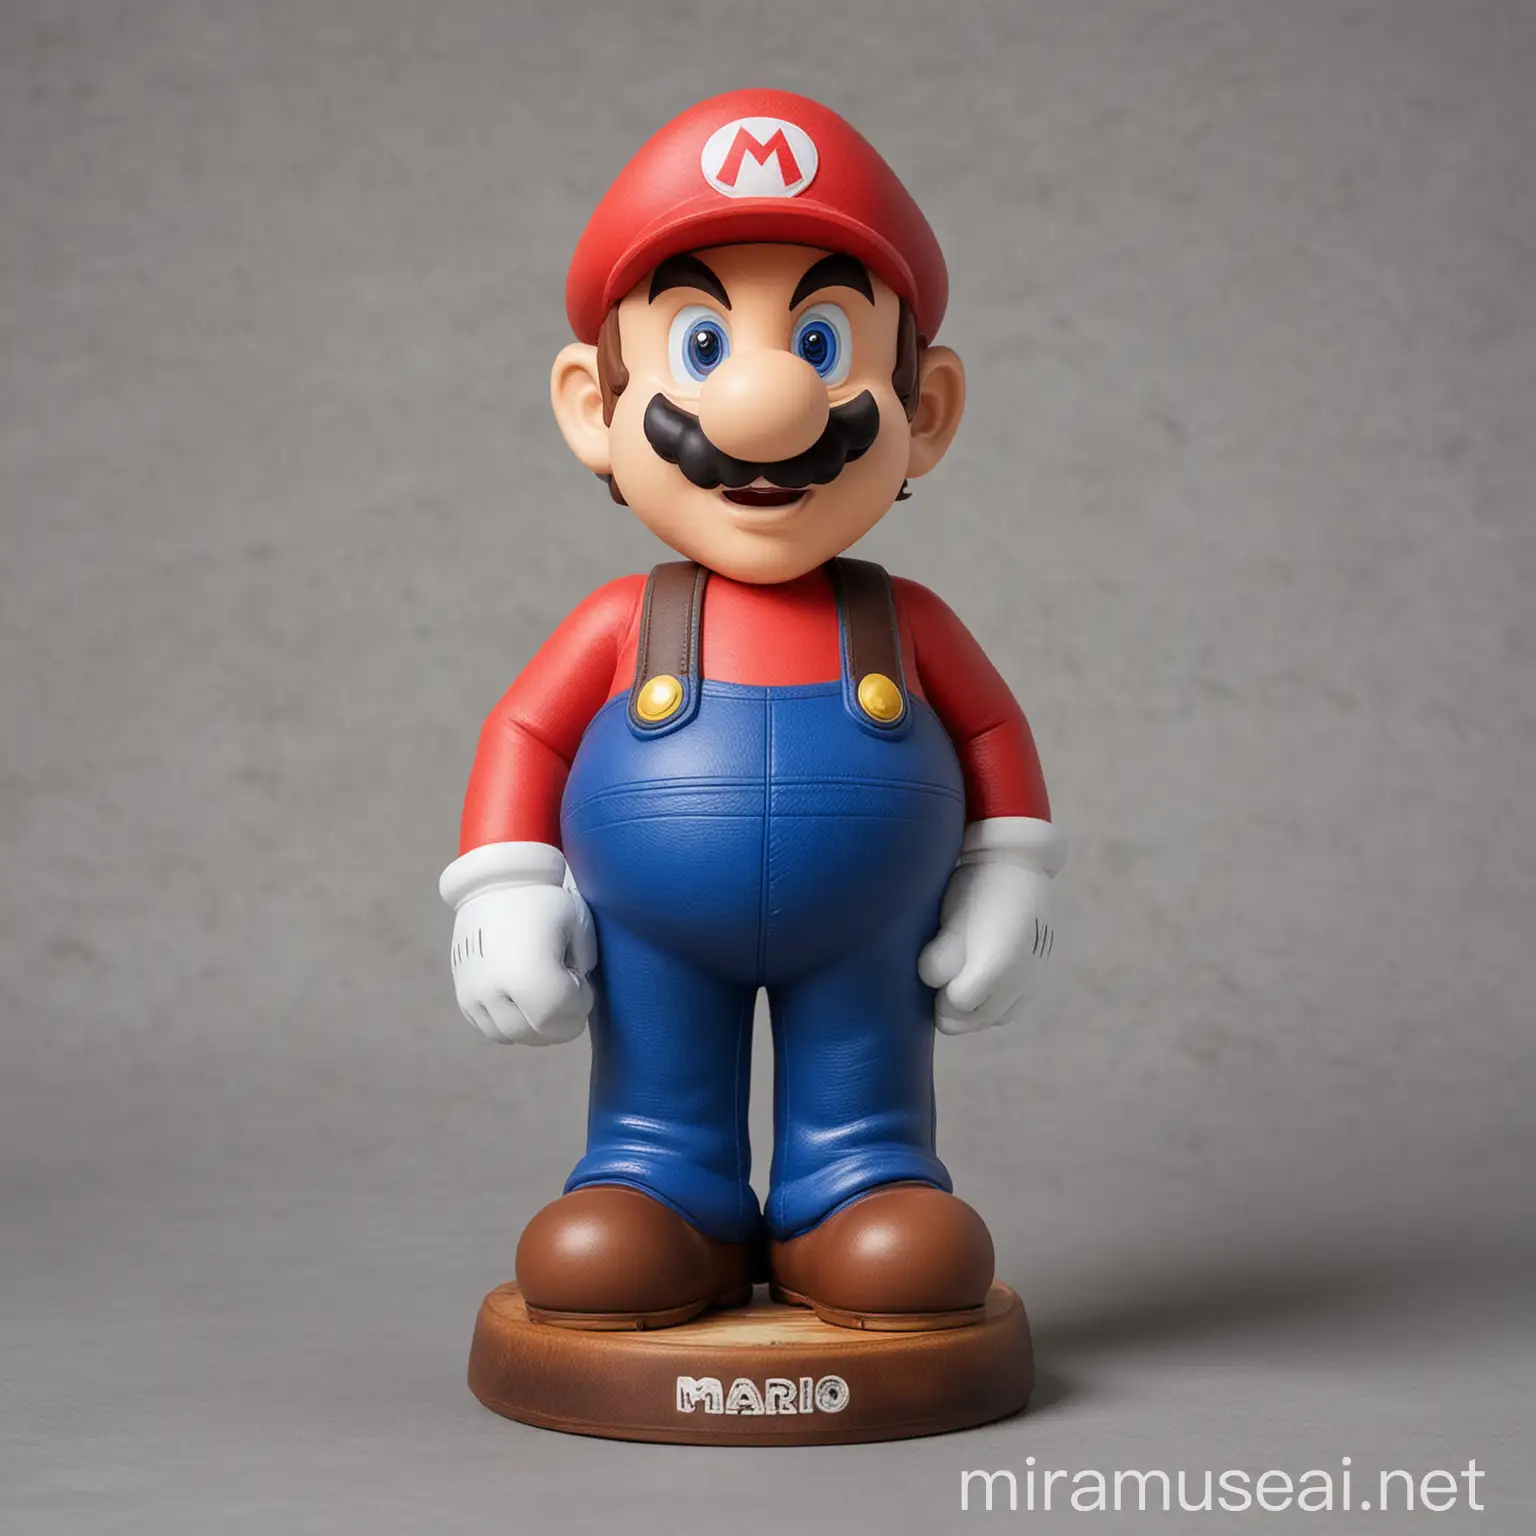 Mario Standing in a Vibrant World